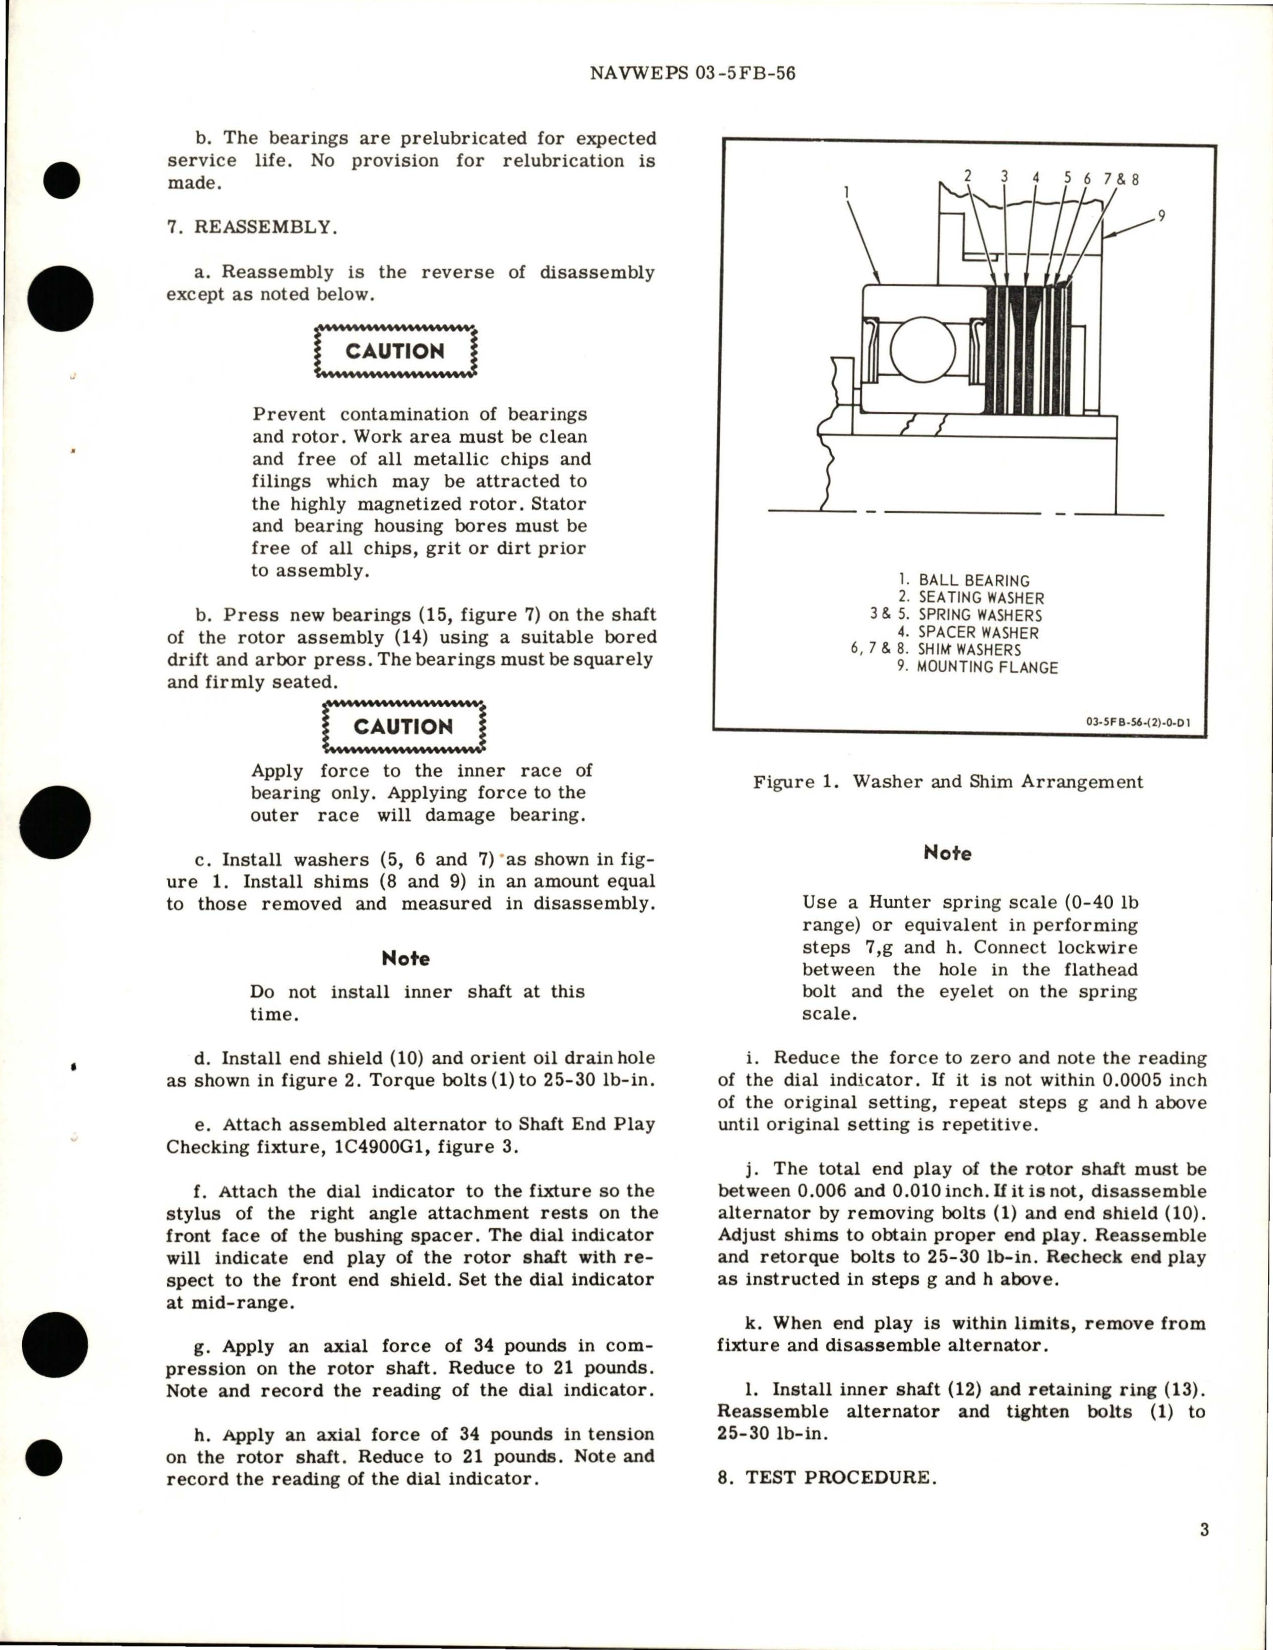 Sample page 5 from AirCorps Library document: Overhaul Instructions with Parts Breakdown for Control Alternator - Model 5ASB40NJ21